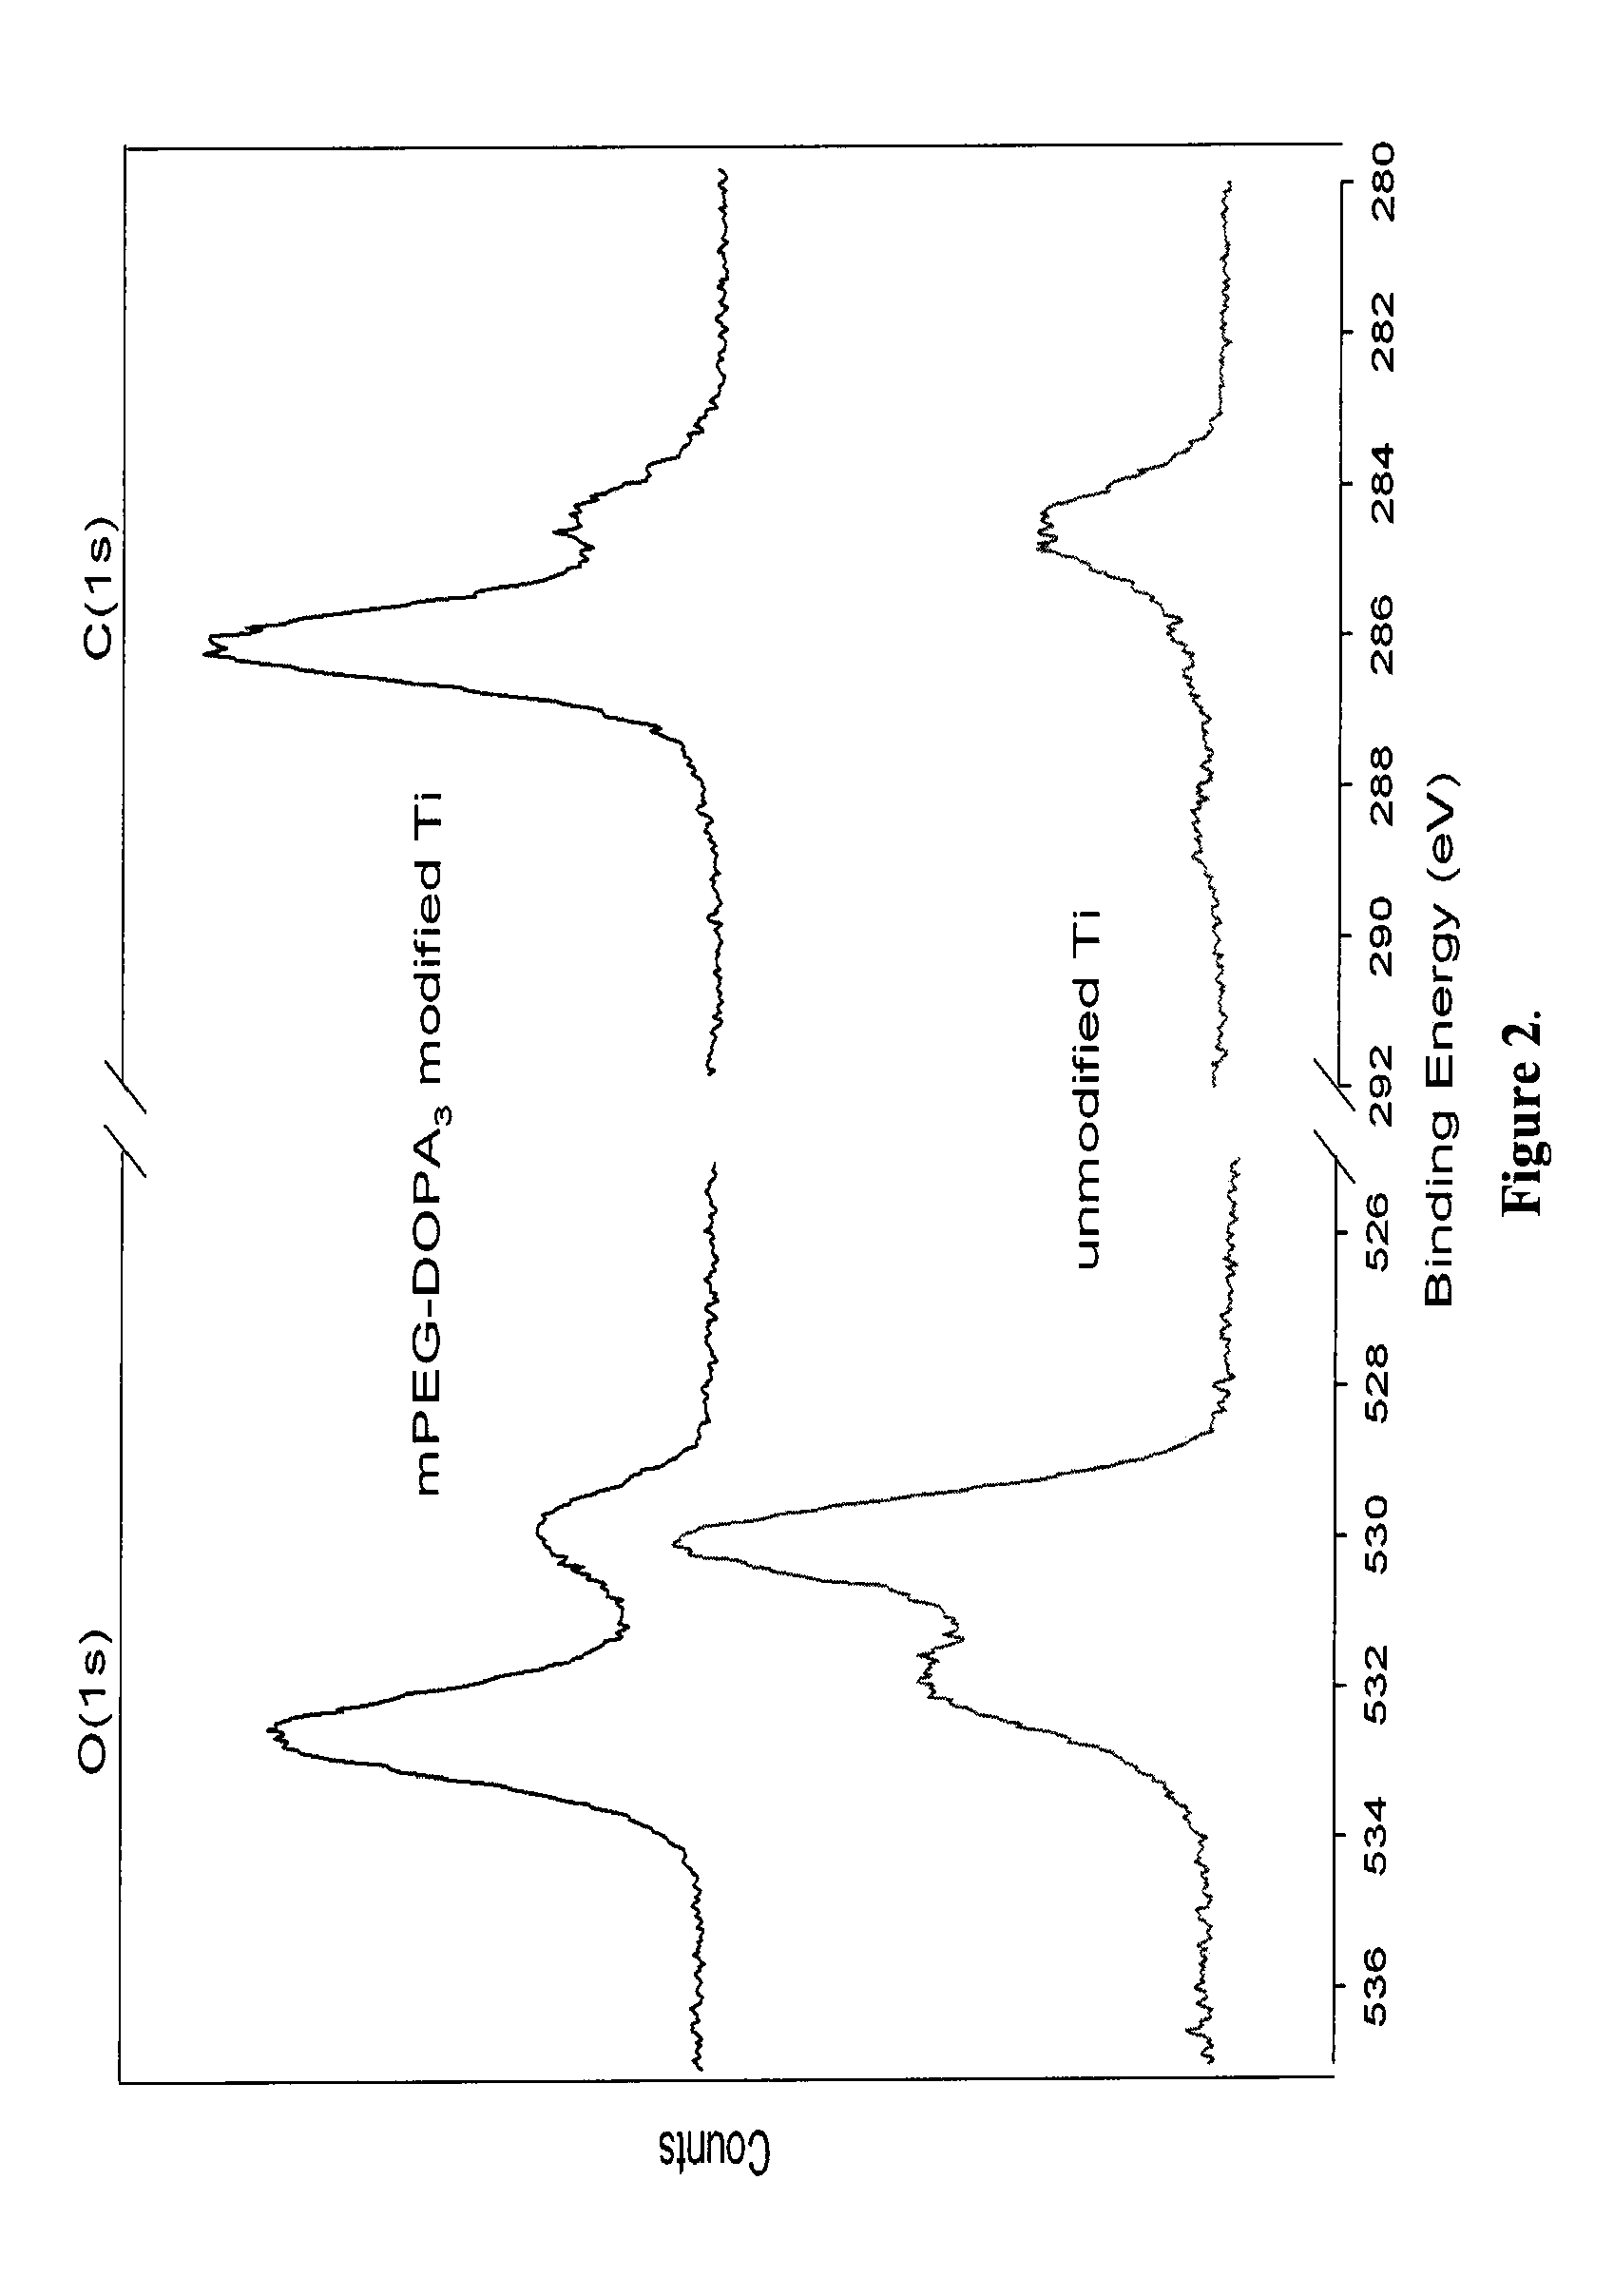 Fouling Resistant Coatings and Methods of Making Same